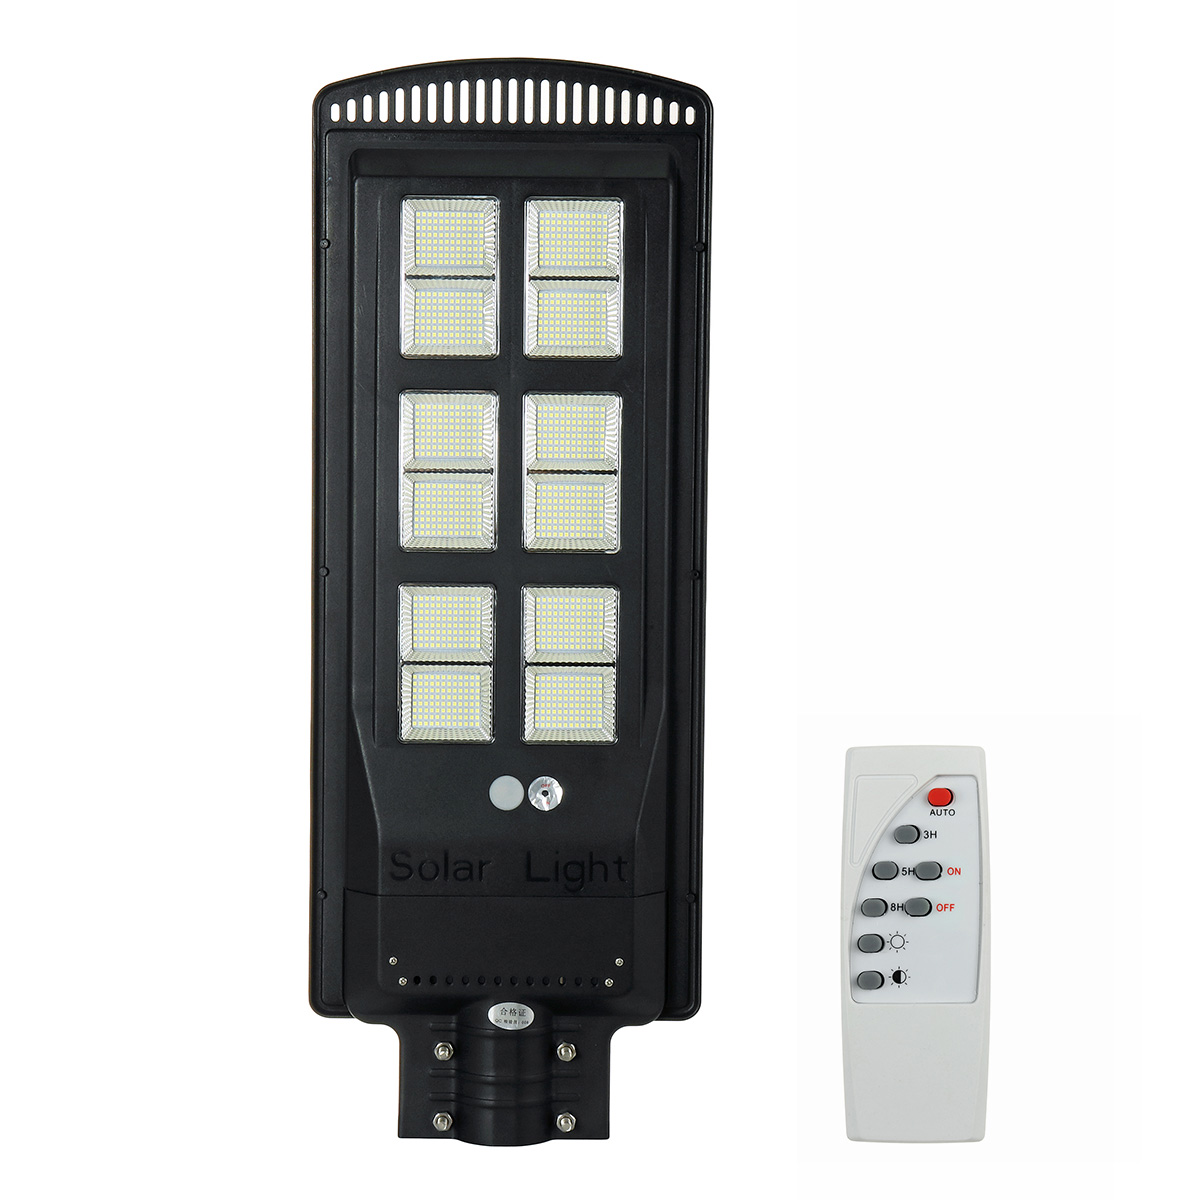 Find 3800W 1152 LED Solar Street Light Motion Sensor Outdoor Garden Wall Lamp Remote for Sale on Gipsybee.com with cryptocurrencies